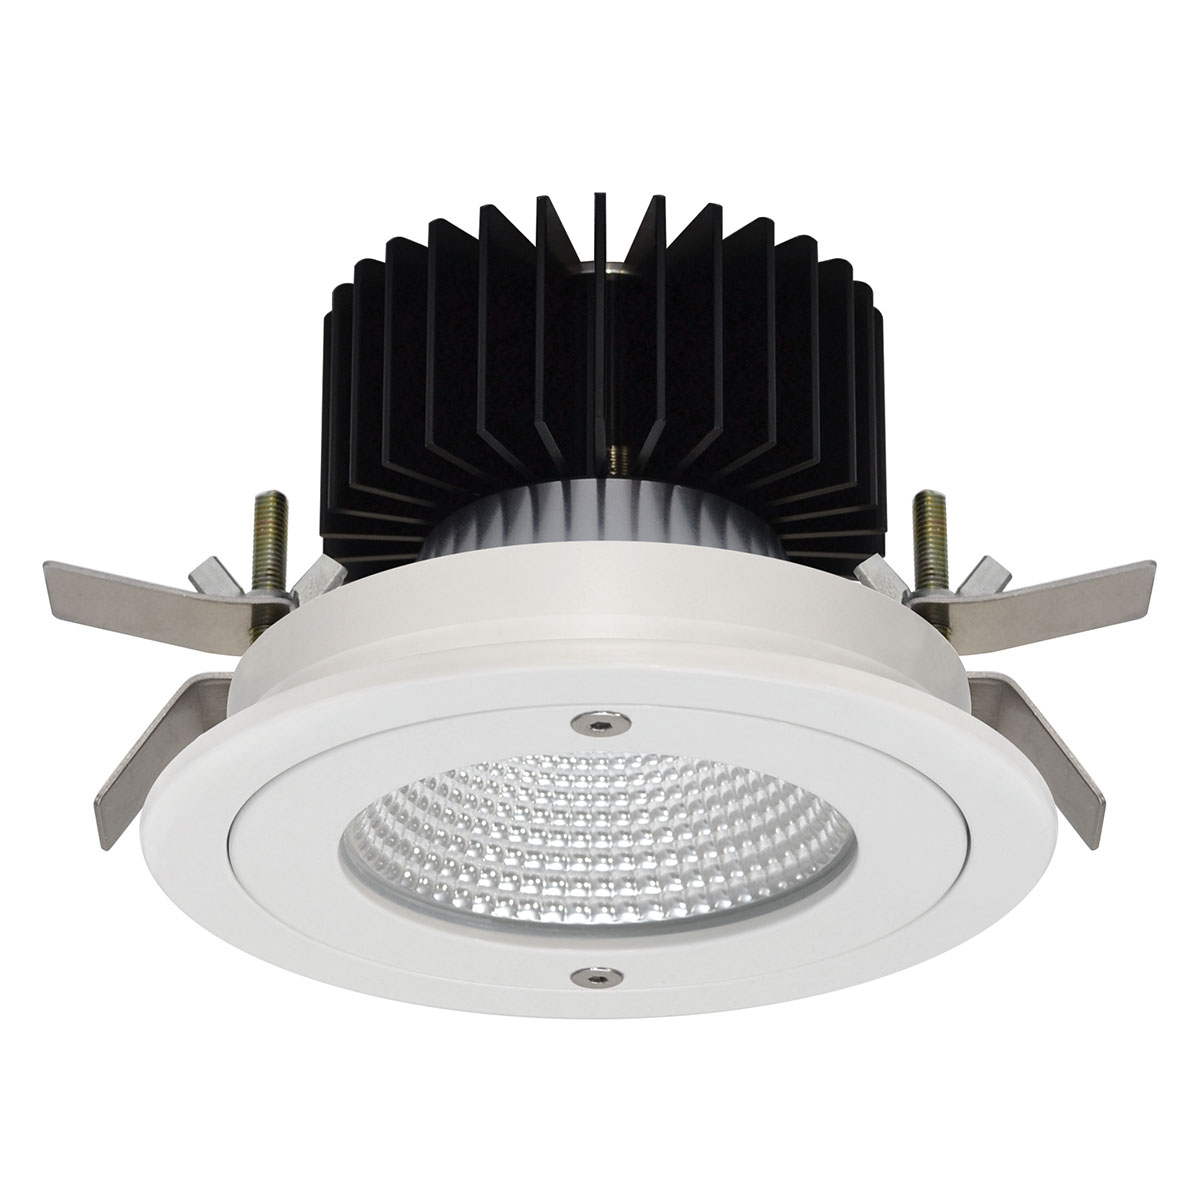 Kopa 7W Anti Tamper Fixed Round Recessed Downlight IP65 Rated 25° Degree Reflector Black